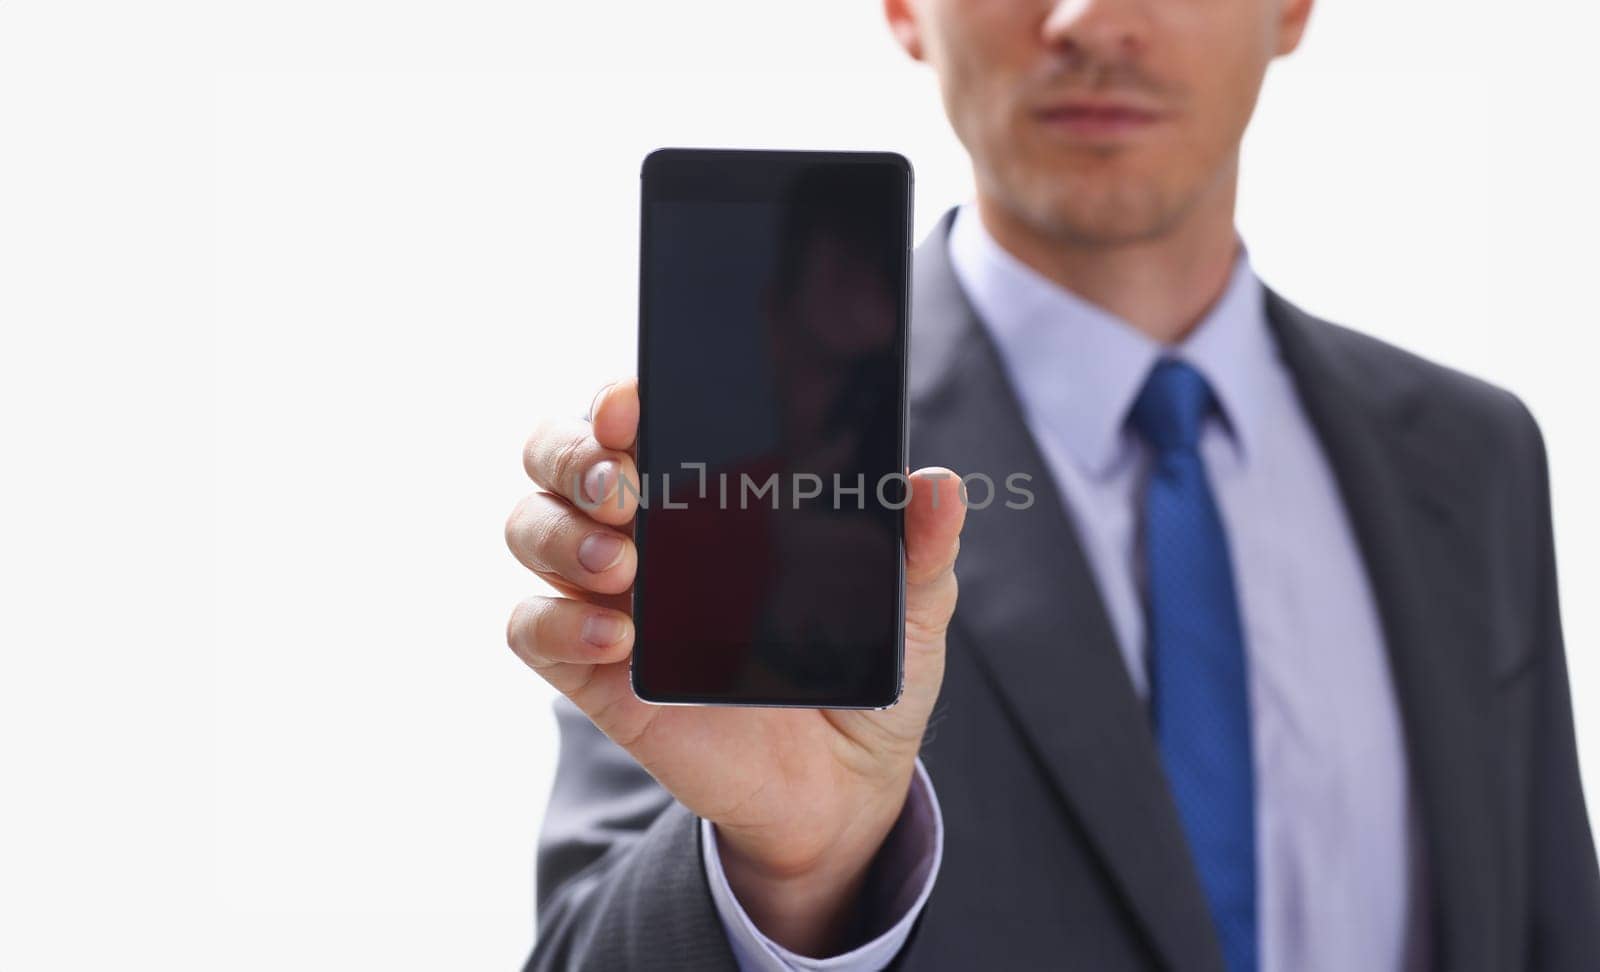 A businessman holding smartphone in hand demonstrates display on which calculator is depicted with figure of zero. The accountant has calculated all transactions are correct debt has credit approx ok